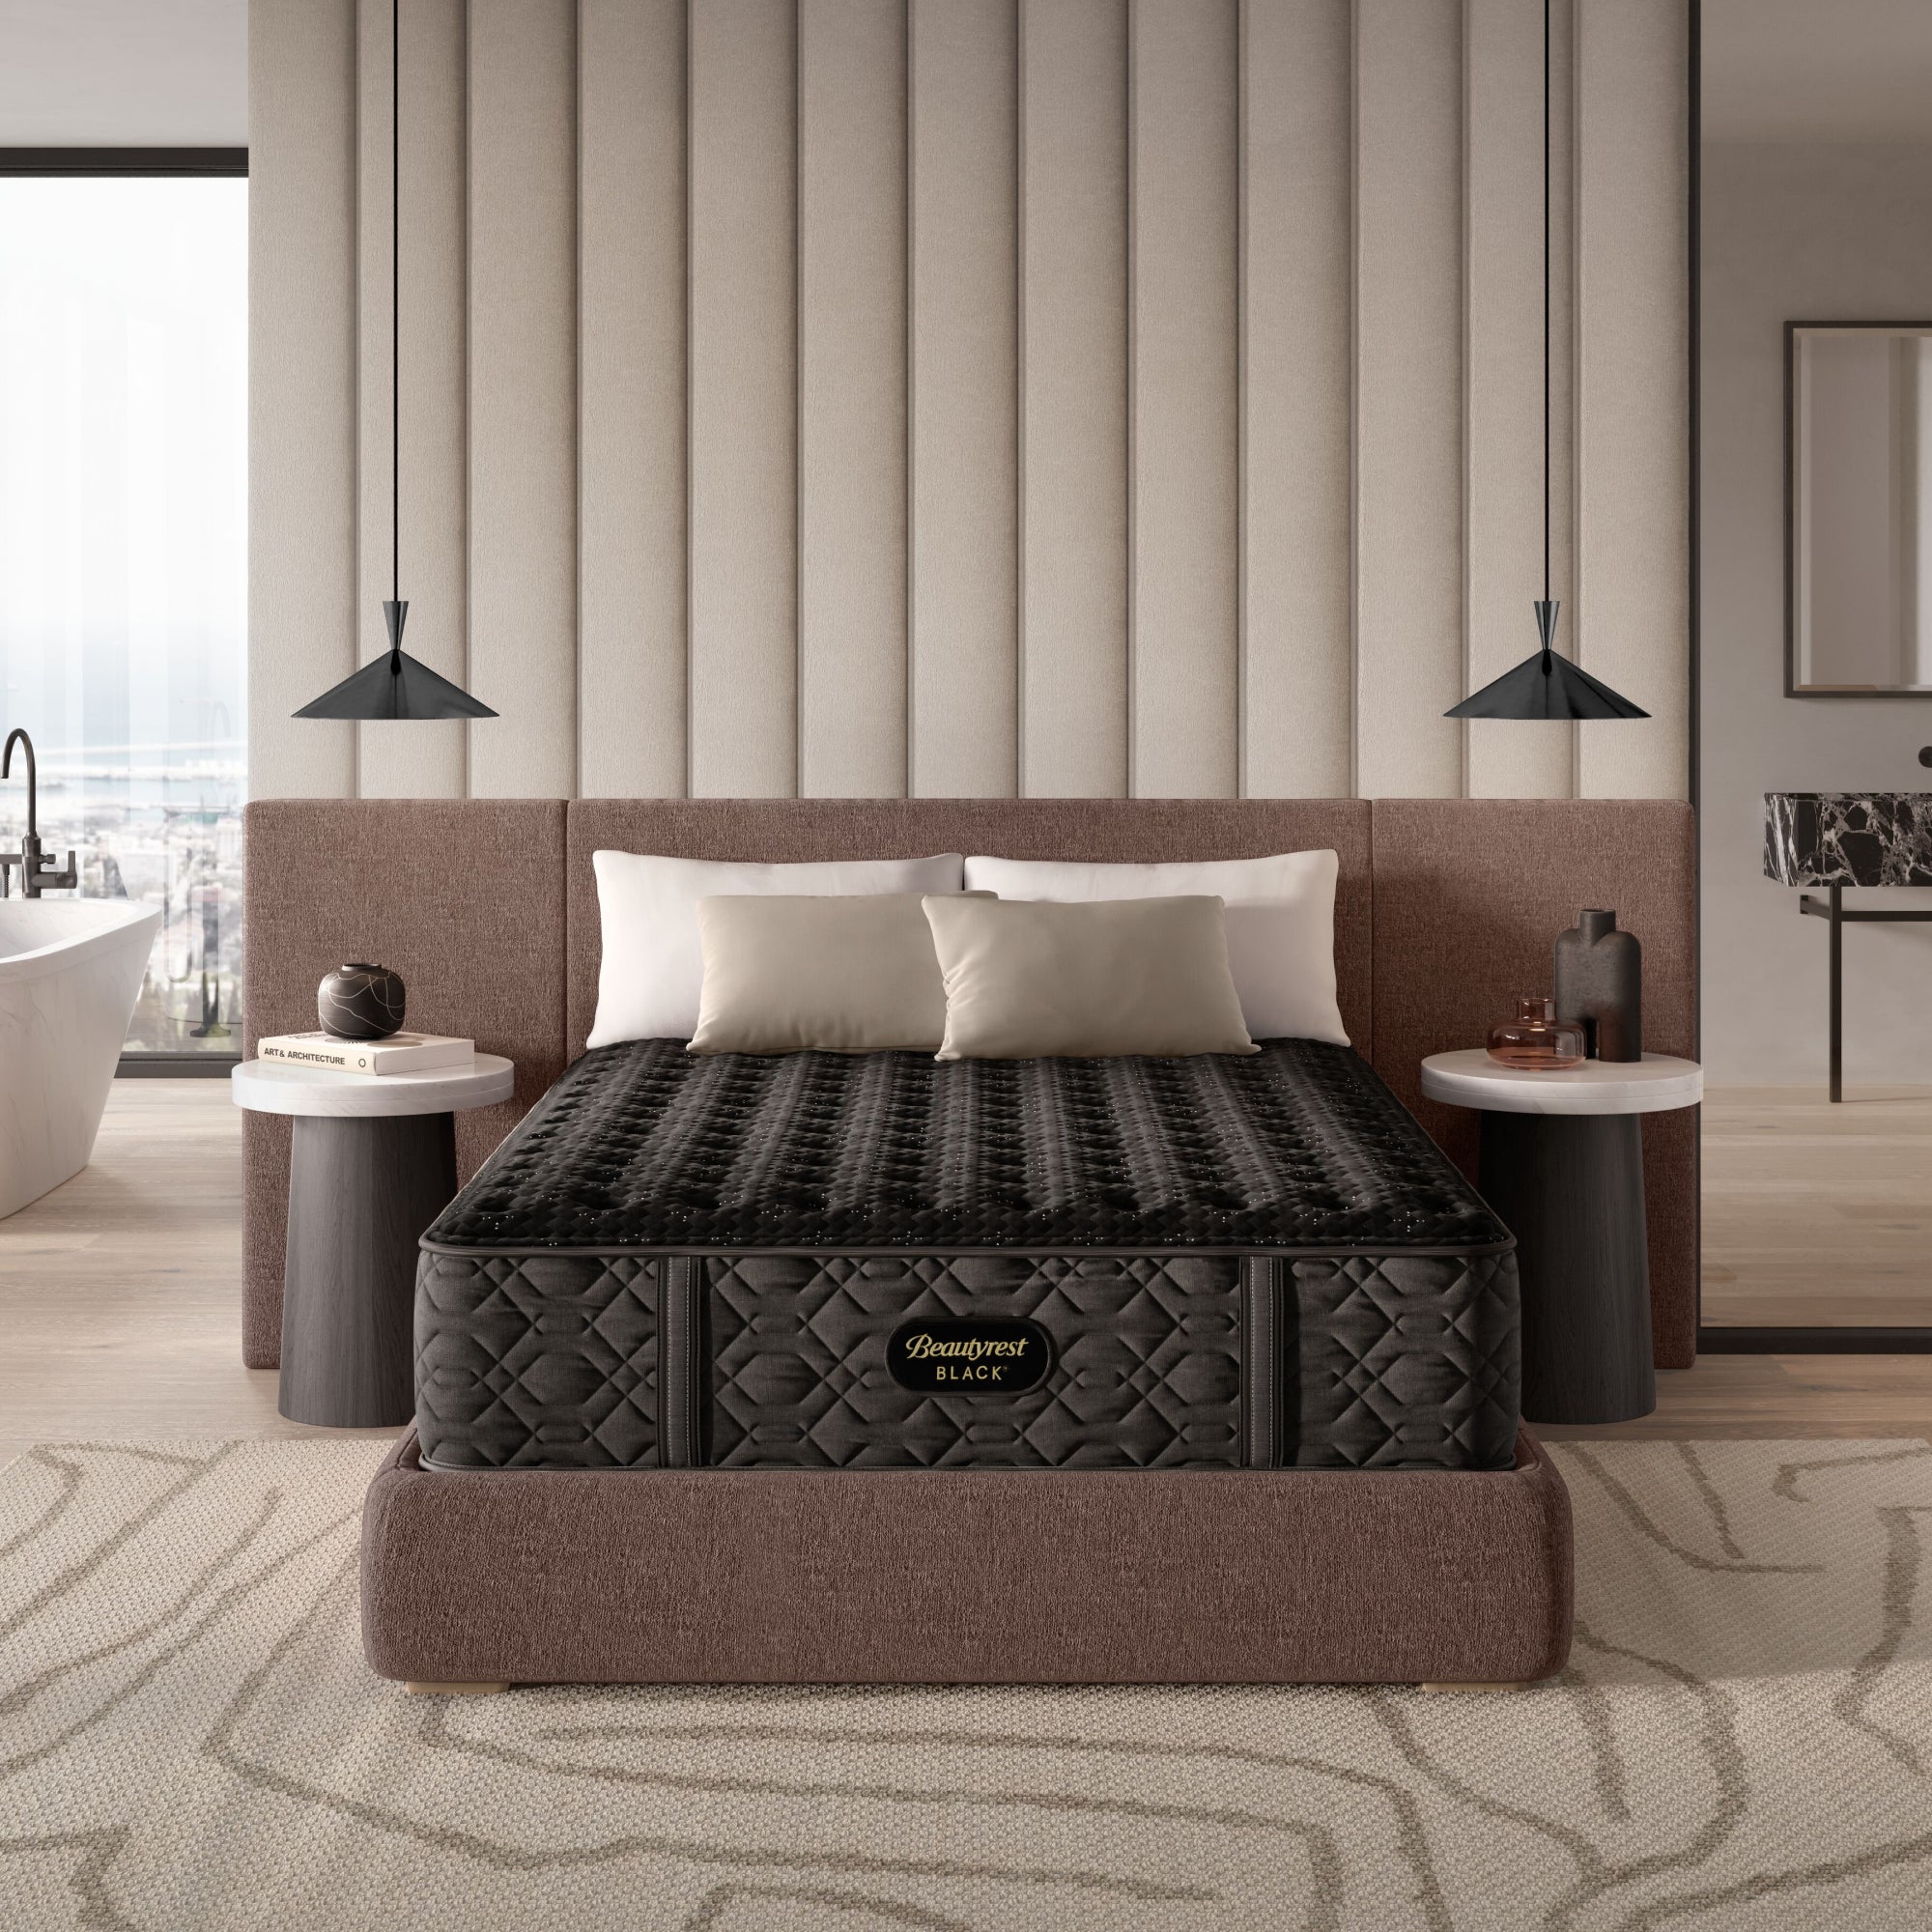 The Beautyrest Black extra firm mattress in a bedroom on a light brown bed frame || series: Series Three  || feel: extra firm